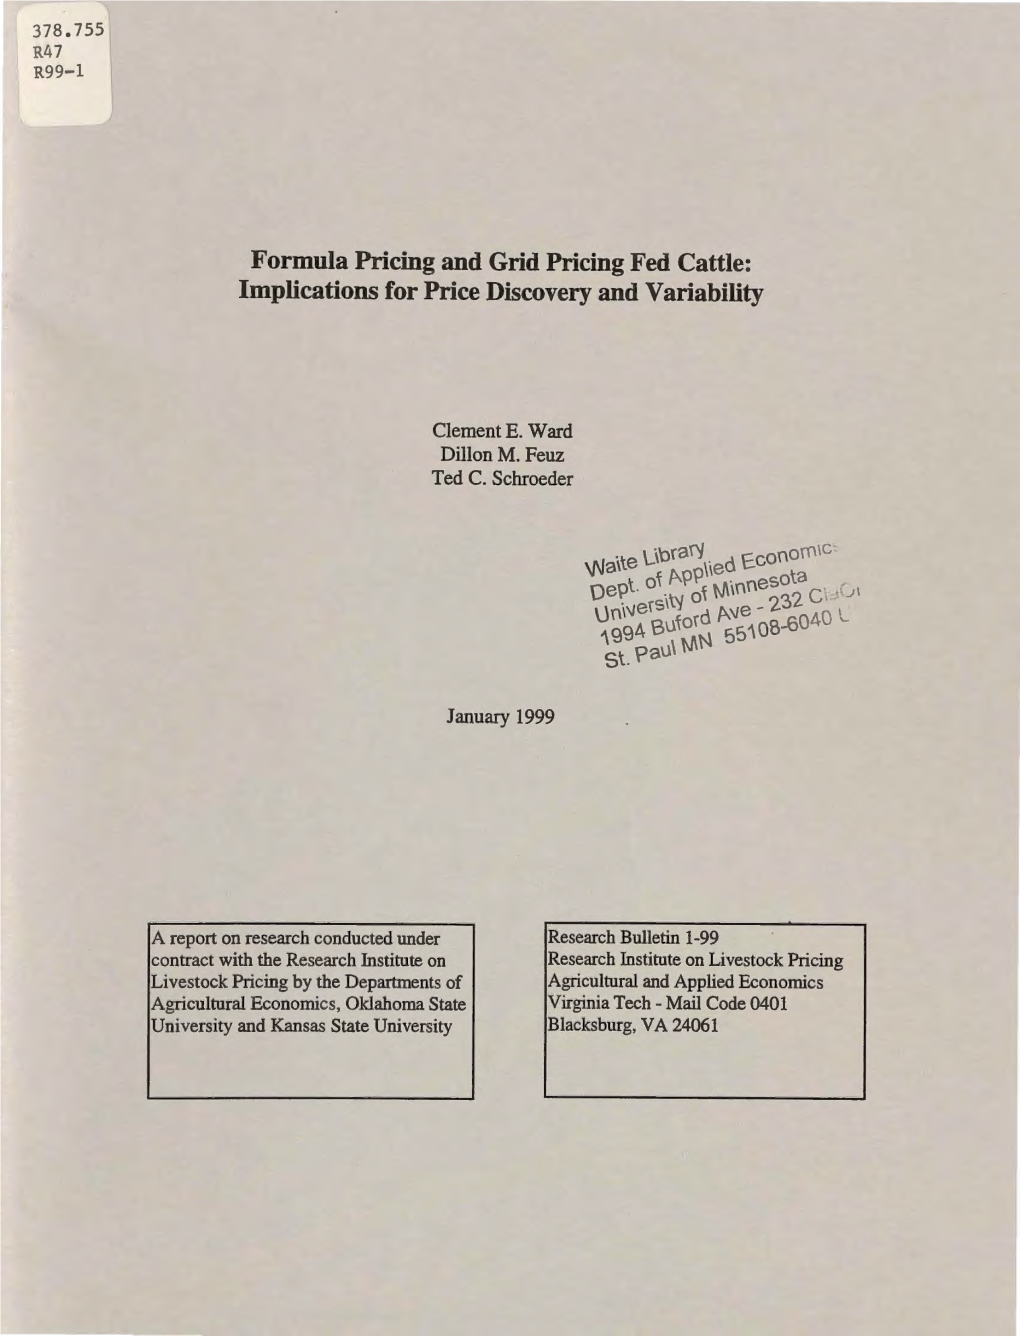 Formula Pricing and Grid Pricing Fed Cattle: Implications for Price Discovery and Variability